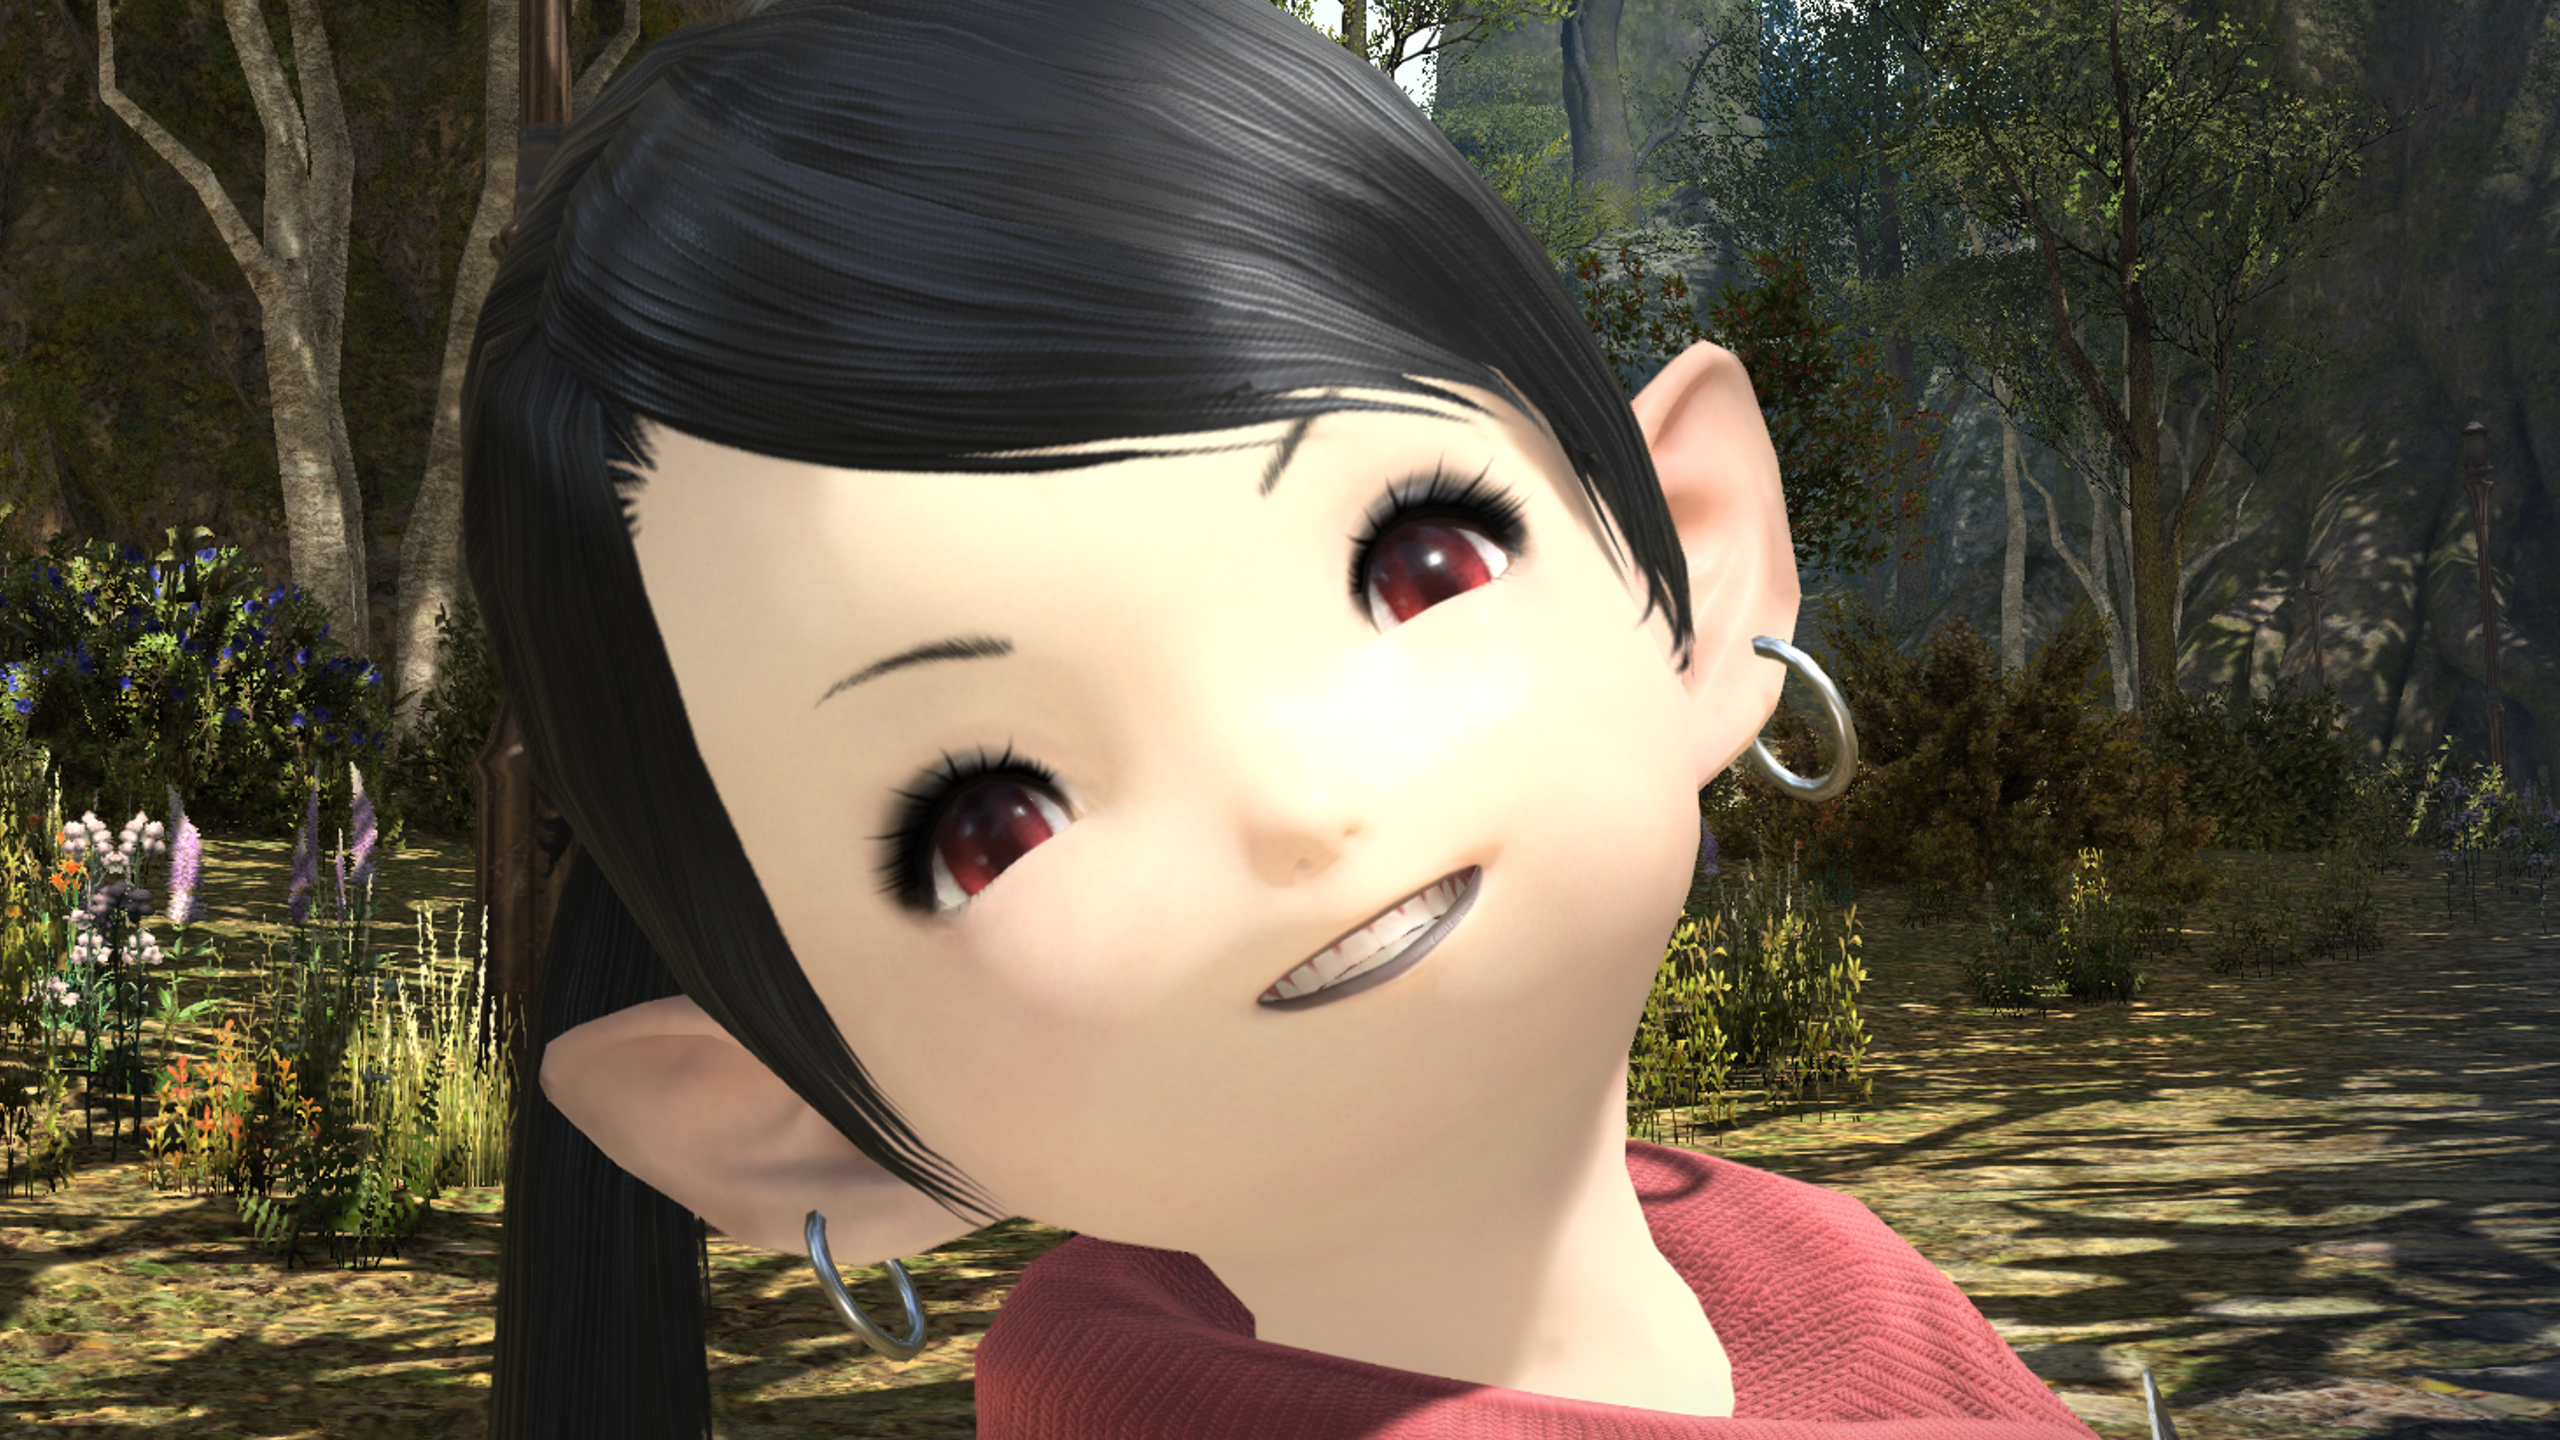  Final Fantasy 14's graphical update has committed the cardinal sin of messing with lalafell teeth, making them more terrifying than ever 